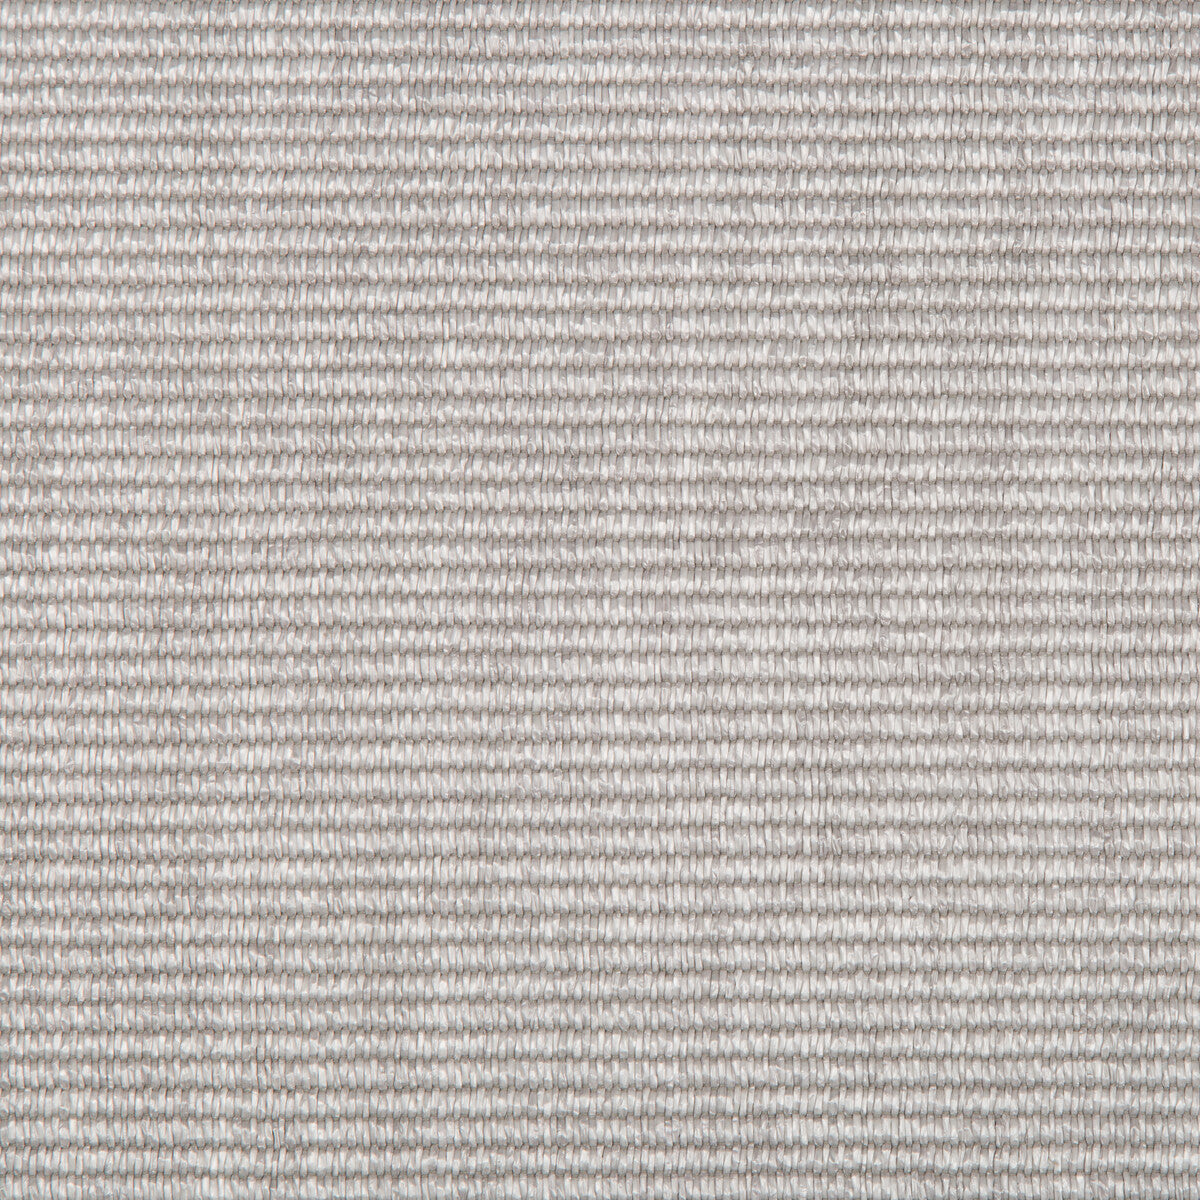 Topanga fabric in gris color - pattern 34952.11.0 - by Kravet Couture in the Sue Firestone Malibu collection